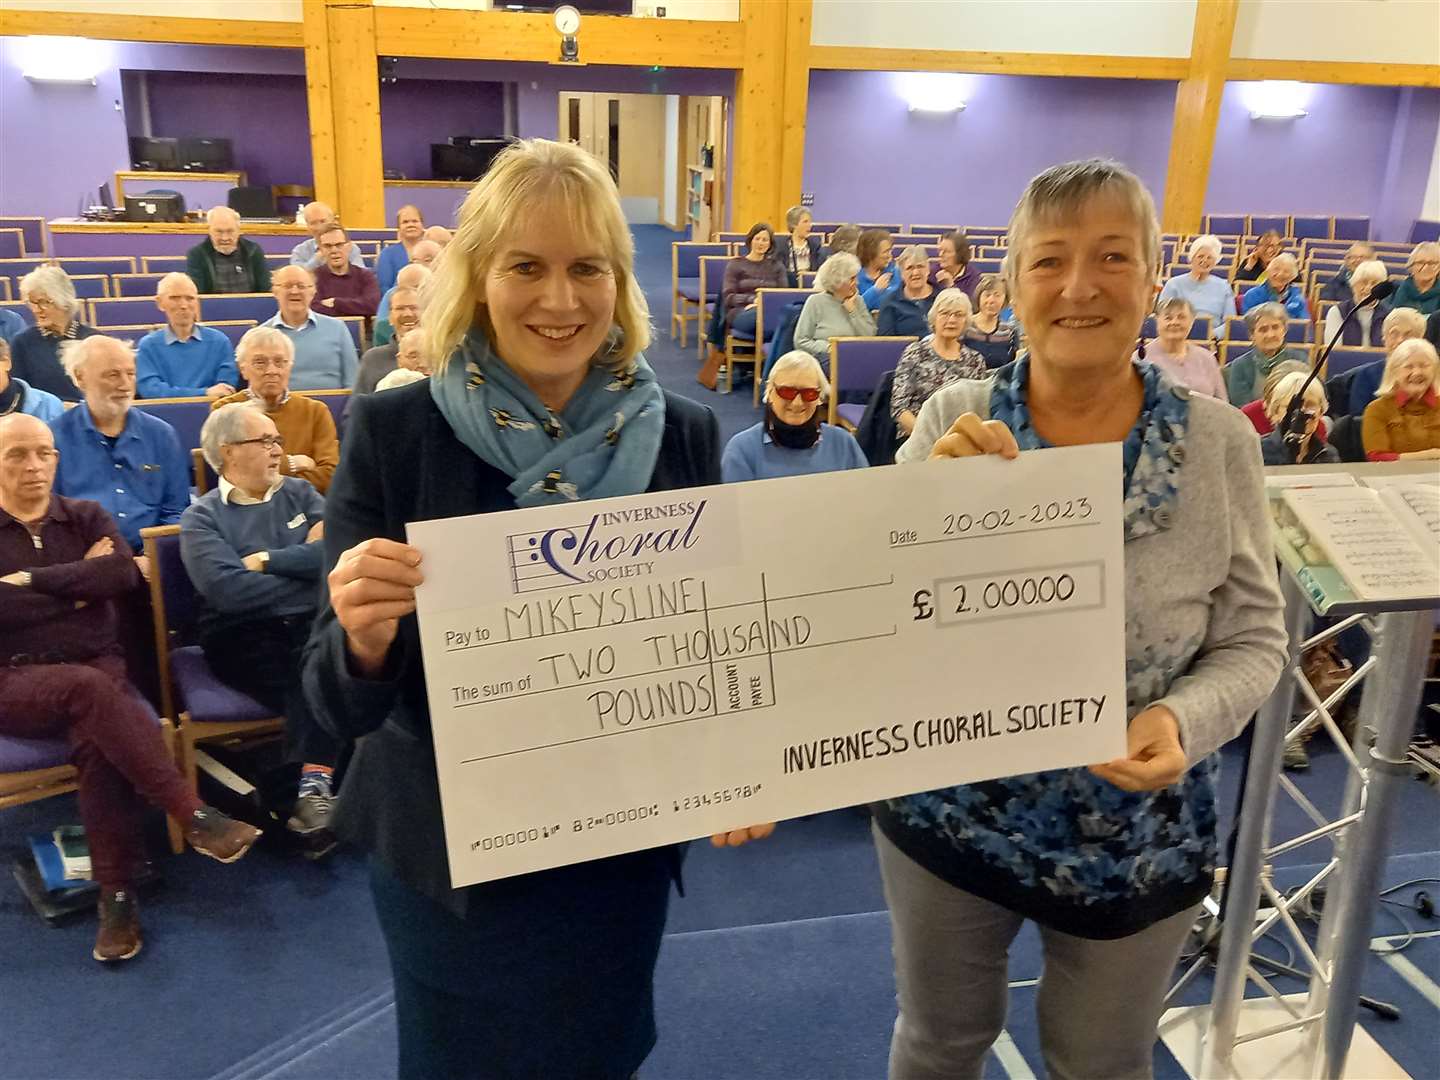 Emily Stokes, CEO of charity Mikeysline receives the cheque from Andrea Gritter one of the carolthon organisers as Inverness Choral Society's members look on.